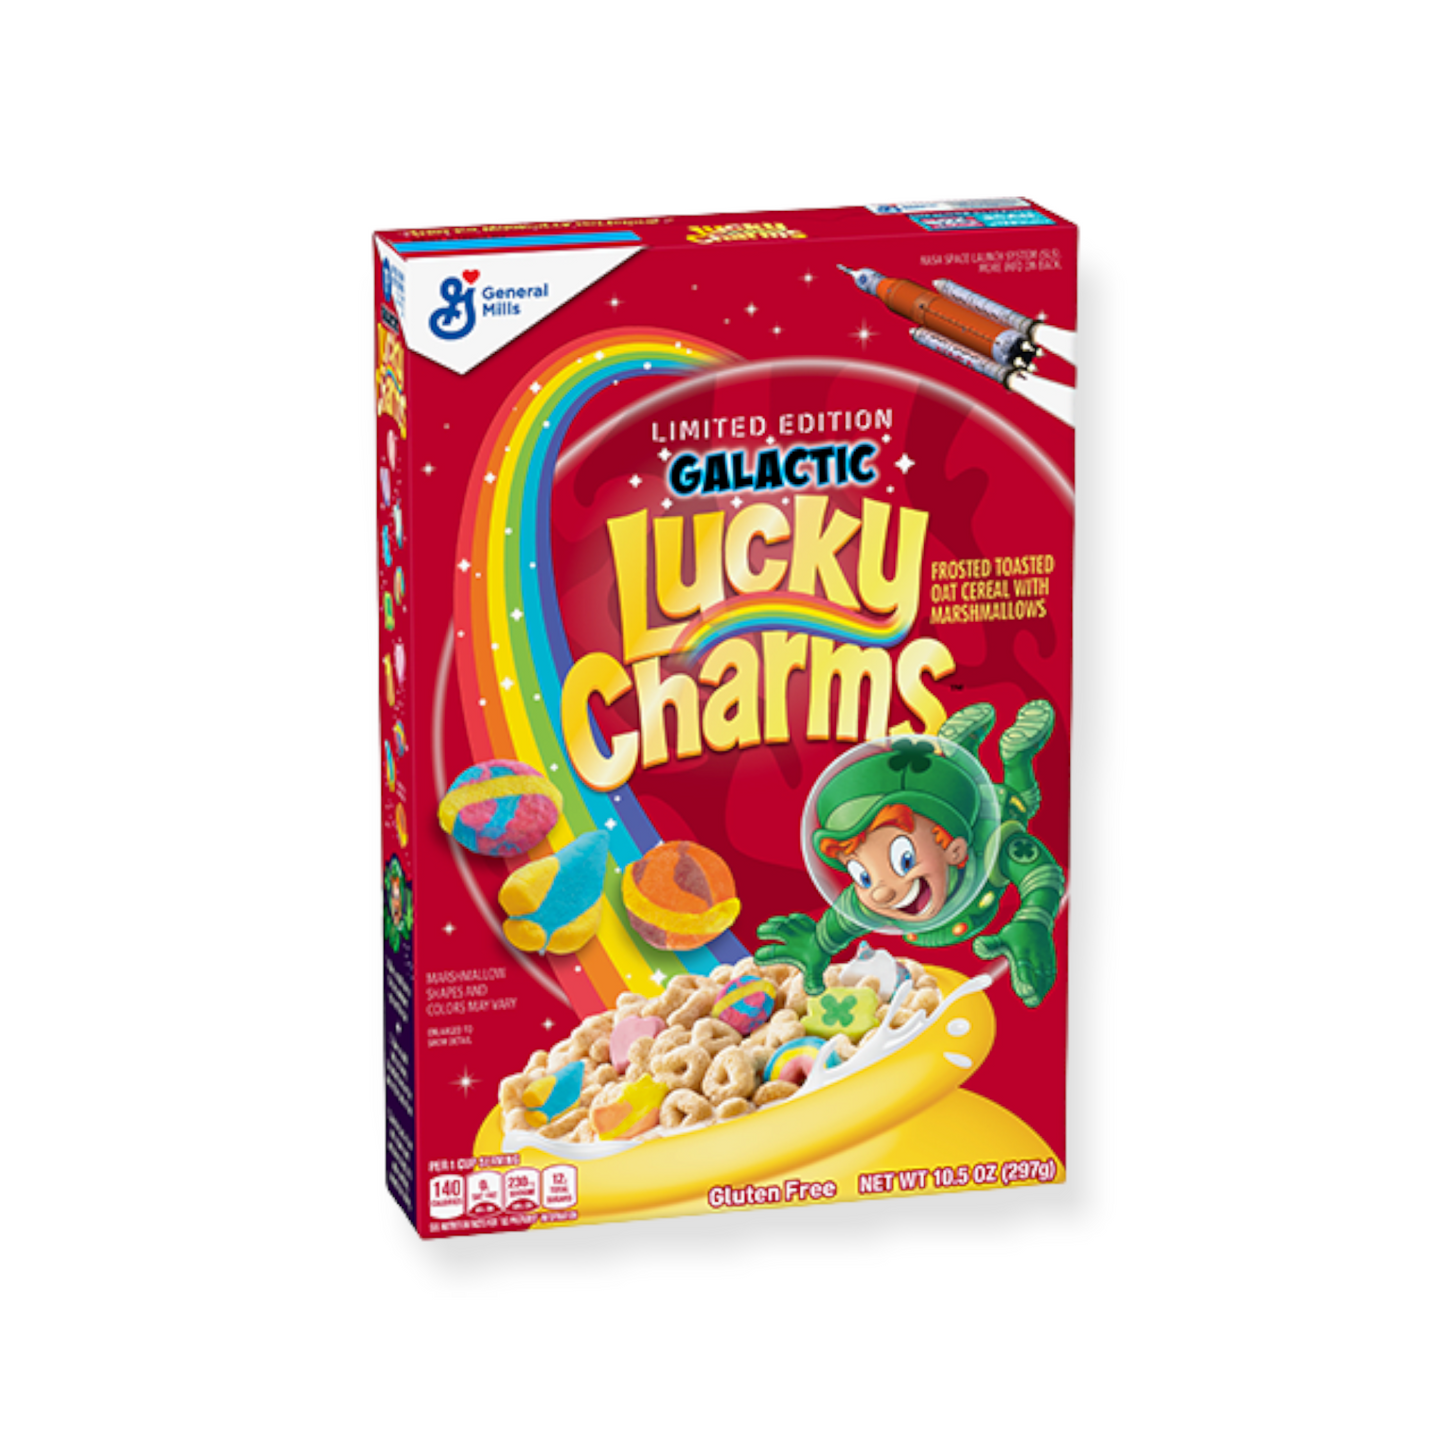 Limited-Edition Galactic Lucky Charms Cereal (297g) (Canadian)